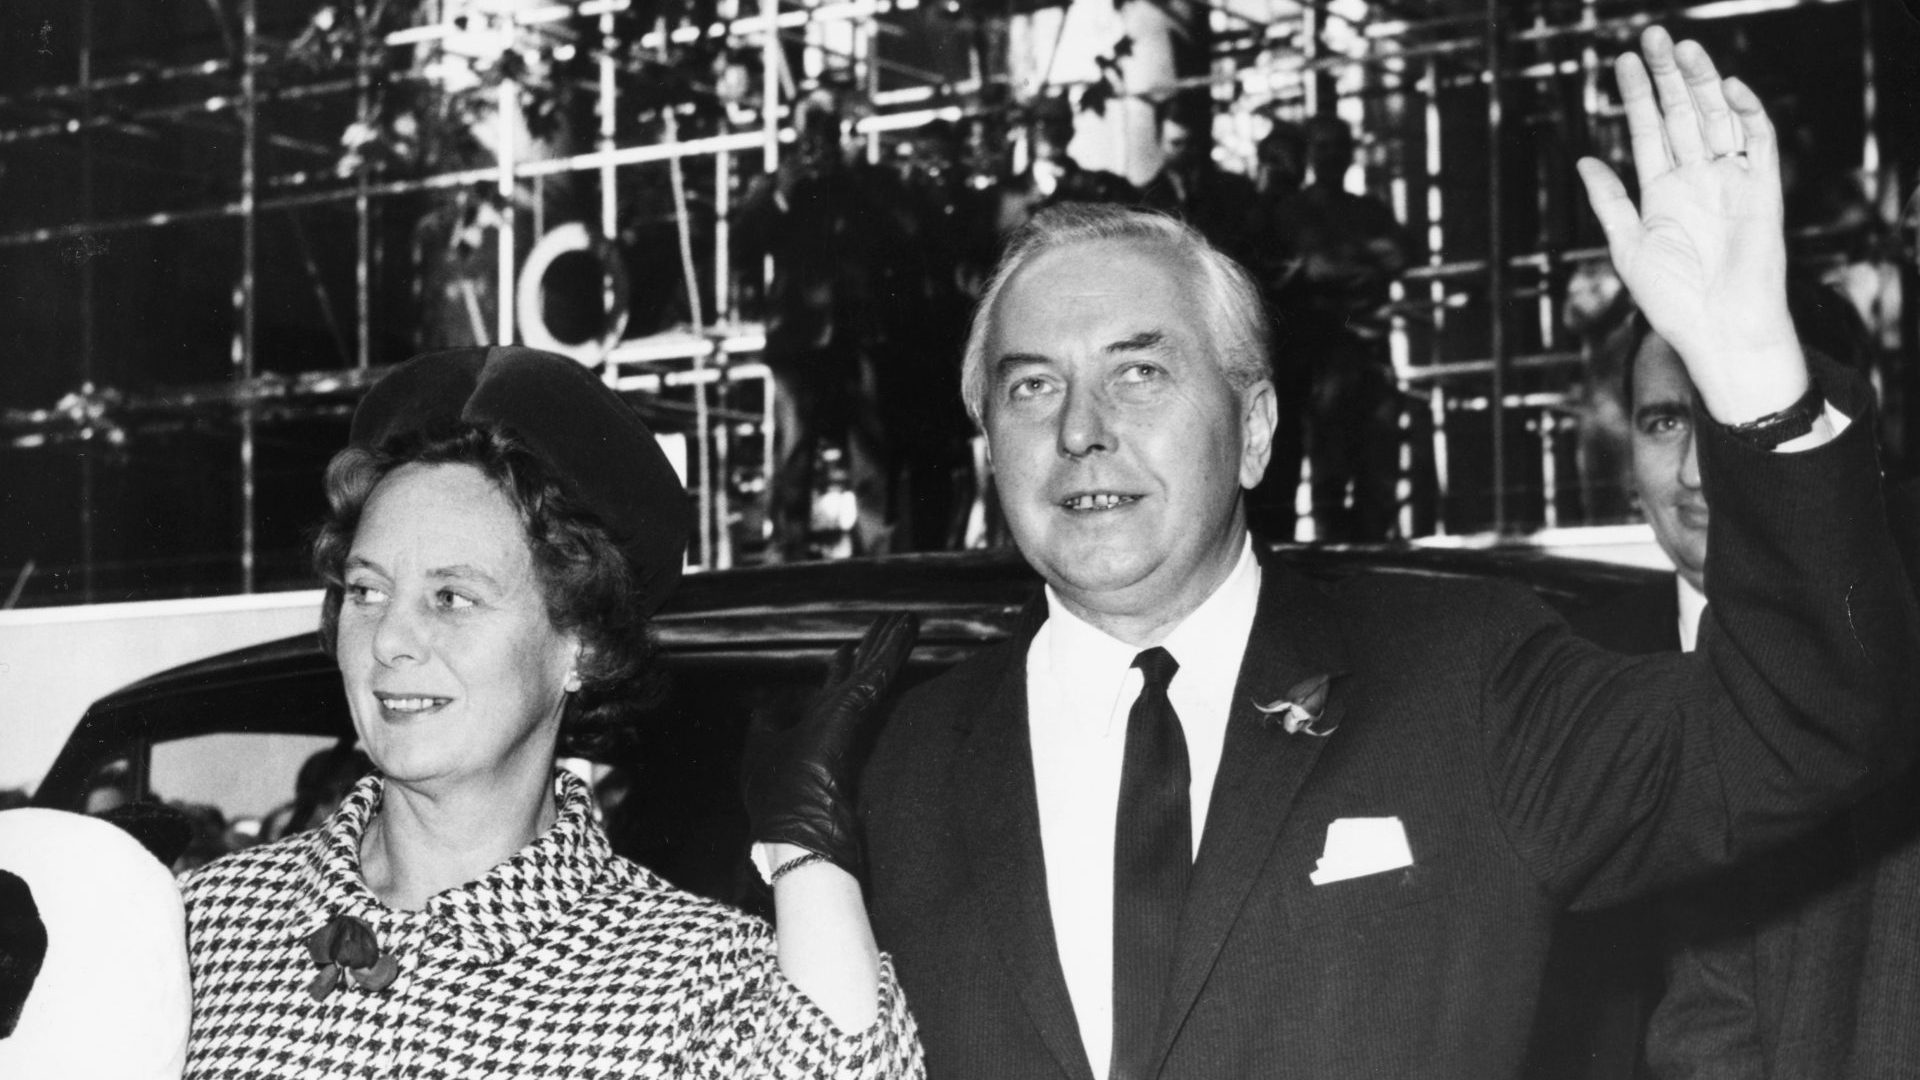 Newly appointed prime minister Harold Wilson with his wife, Mary, waving to the press as he arrives at Labour Party headquarters, Transport House, London, October 16th 1964. (Photo by Reg Speller/Fox Photos/Getty Images)